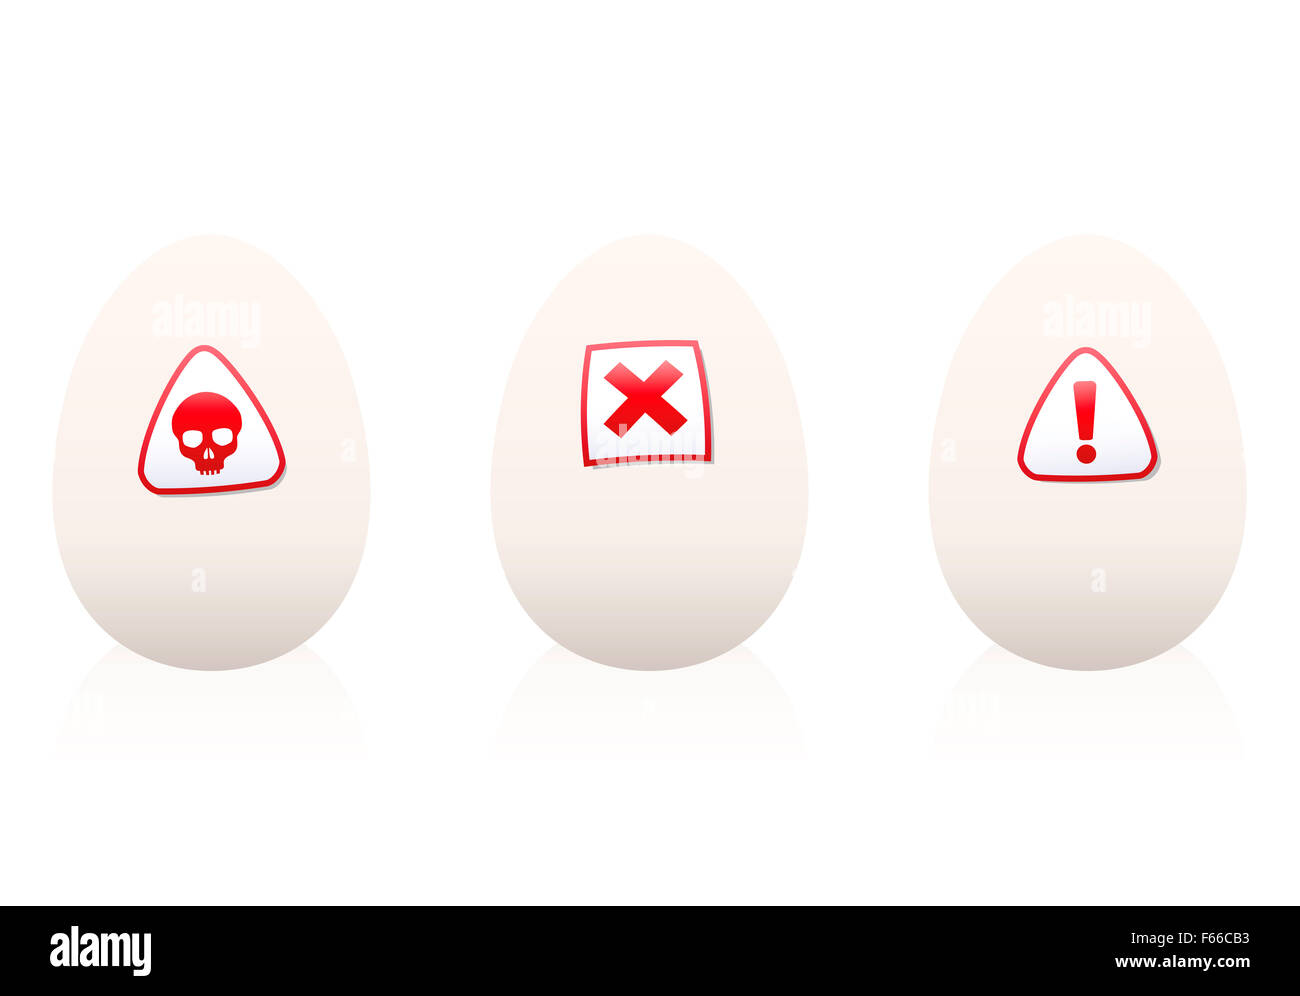 Eggs with danger symbols on it - warning against unhealthy food or nutrition. Illustration on white background. Stock Photo